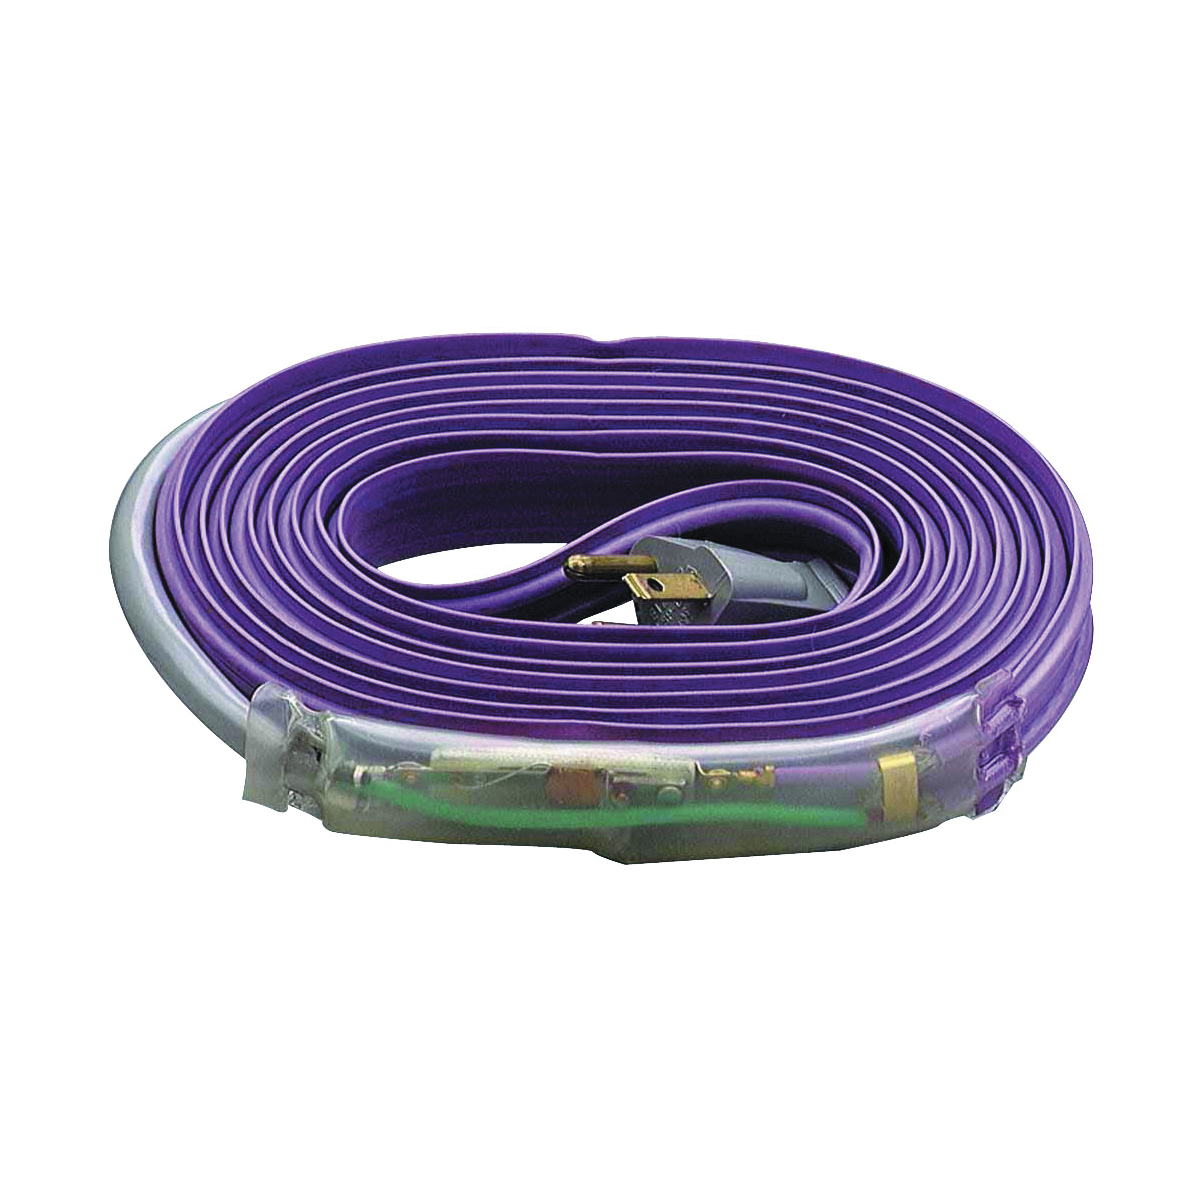 04341 Pipe Heating Cable, 13 ft L